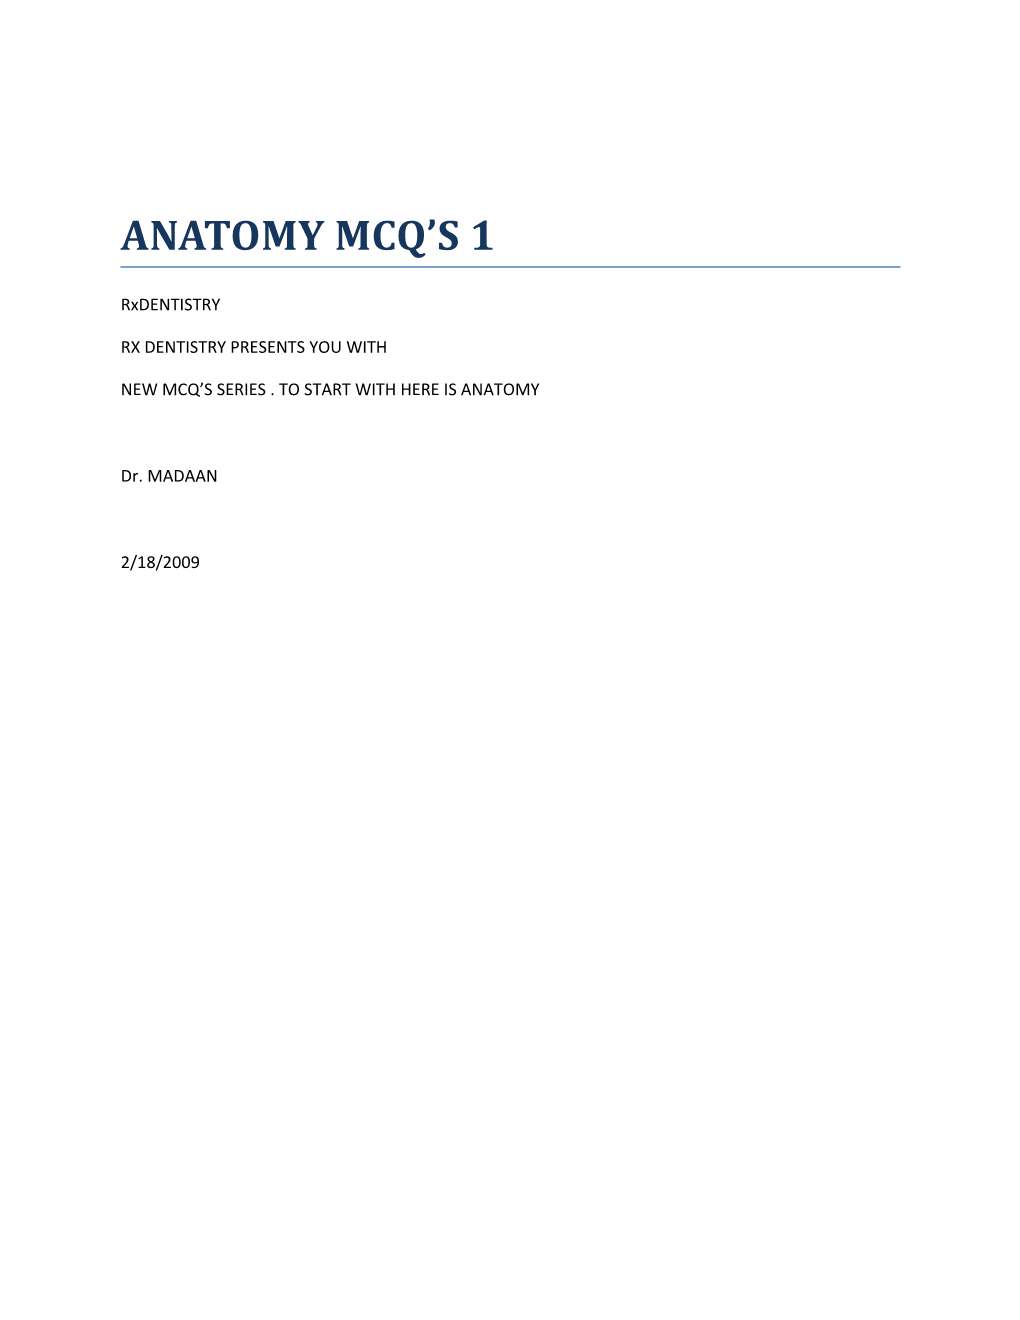 New Mcq S Series . to Start with Here Is Anatomy